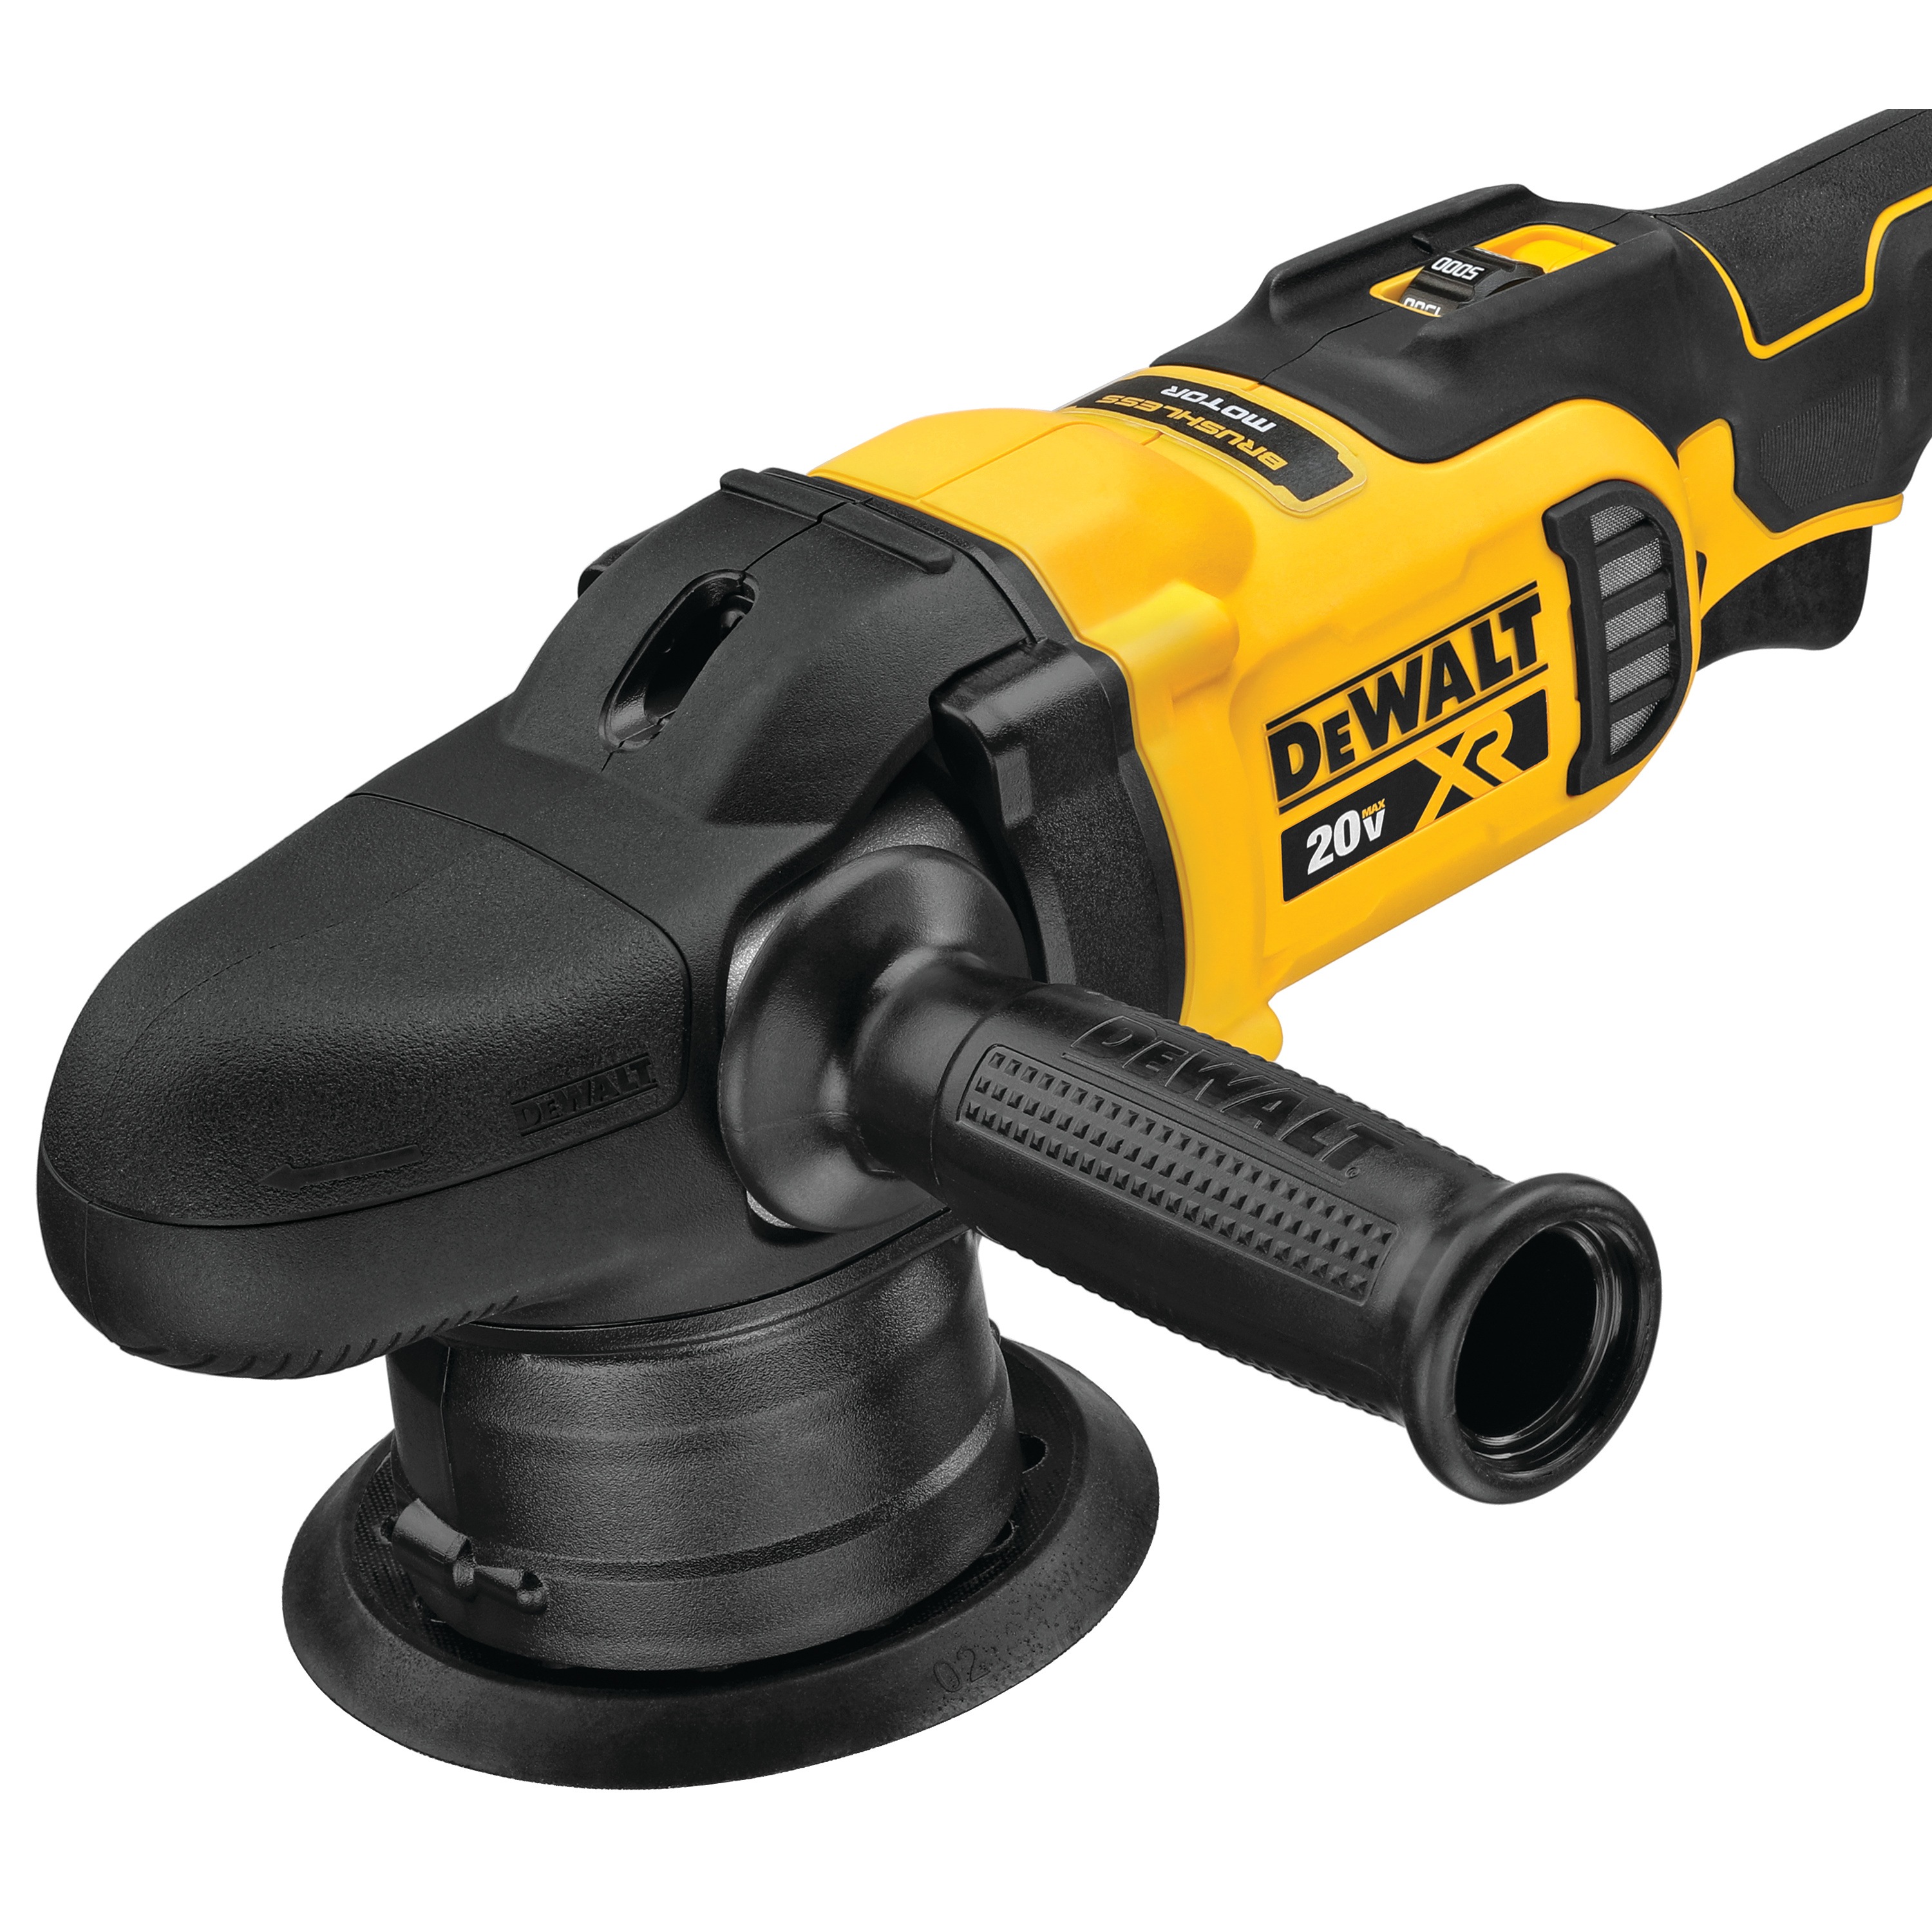 profile of XR cordless variable speed random orbit polisher with battery pack